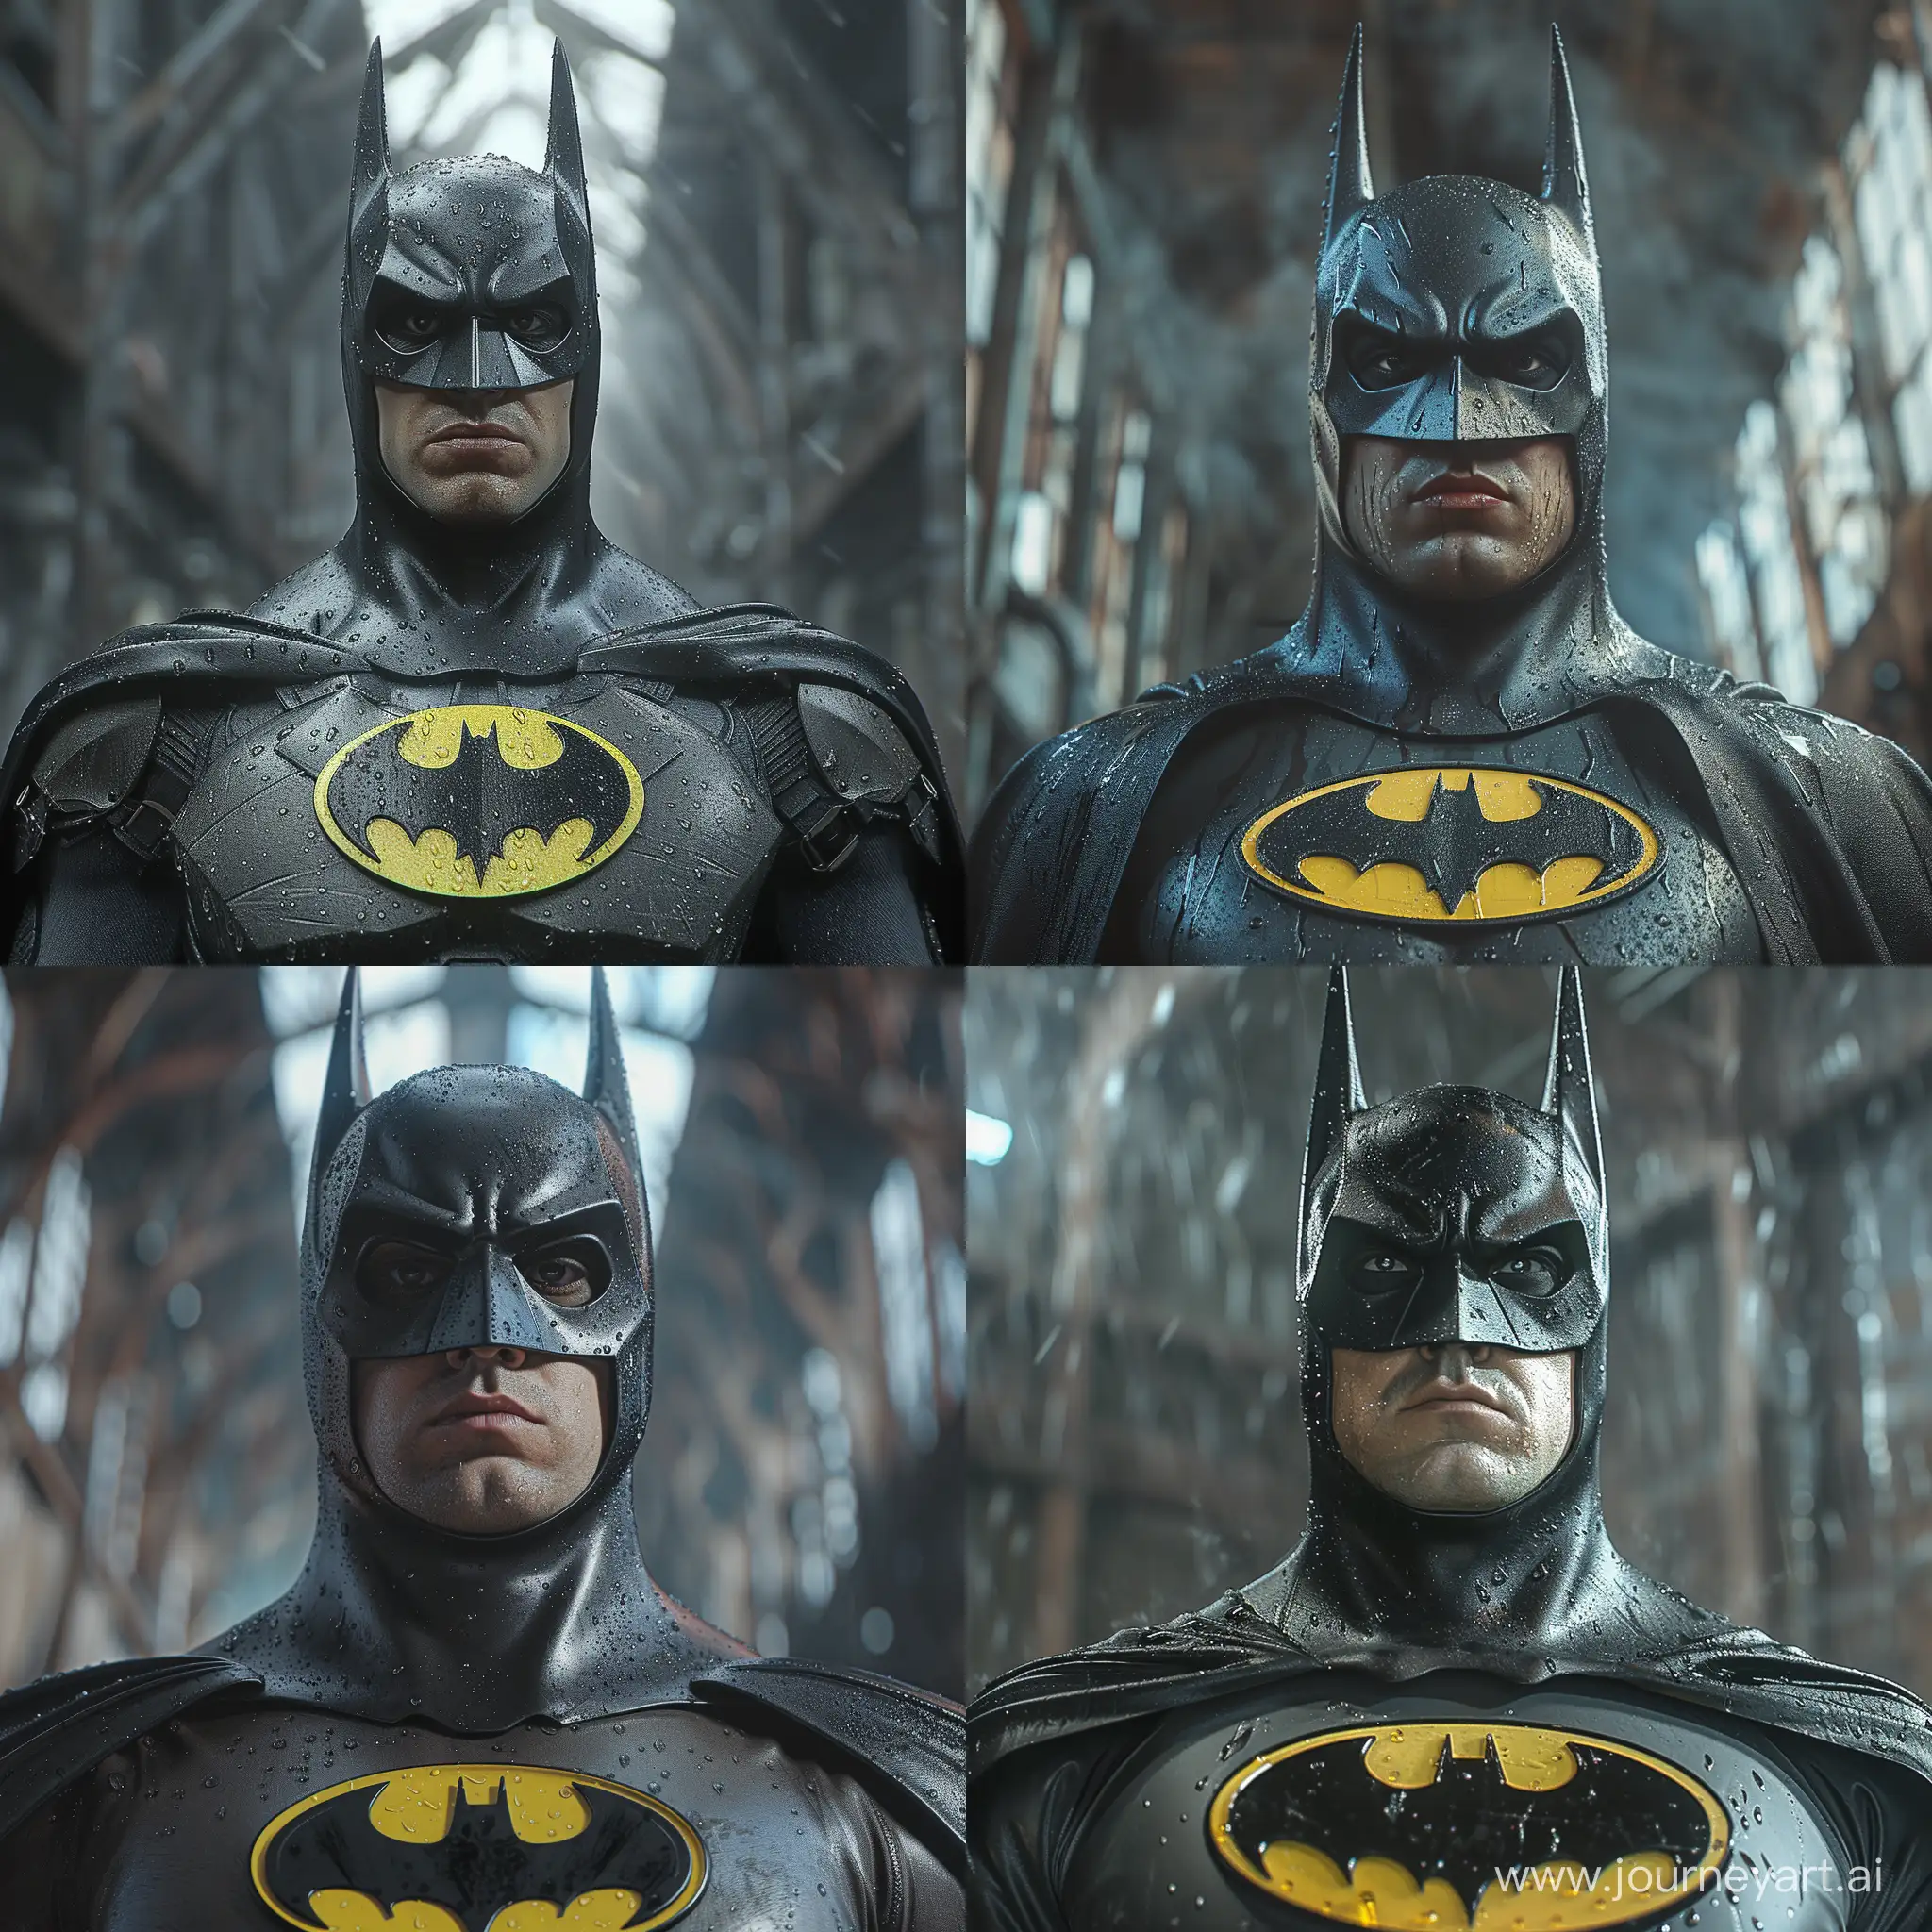 a full body of realistic batman 1989 costume, the opening for the eyes and lower part of the face. The character's expression is serious or stern, consistent with the typical portrayal of Batman as a determined and intense superhero. The costume appears to be made of a material that mimics the texture of leather, readiness to face danger. The lighting is dim, suggesting a dark or nighttime setting, which is characteristic of the Gotham City environment where batman often operates. The background is blurred and not clearly discernible, but it seems to be a gloomy and possibly industrial setting, adding to the overall dark and gritty atmosphere often associated with batman media --stylize 750 --s 750 --v 6